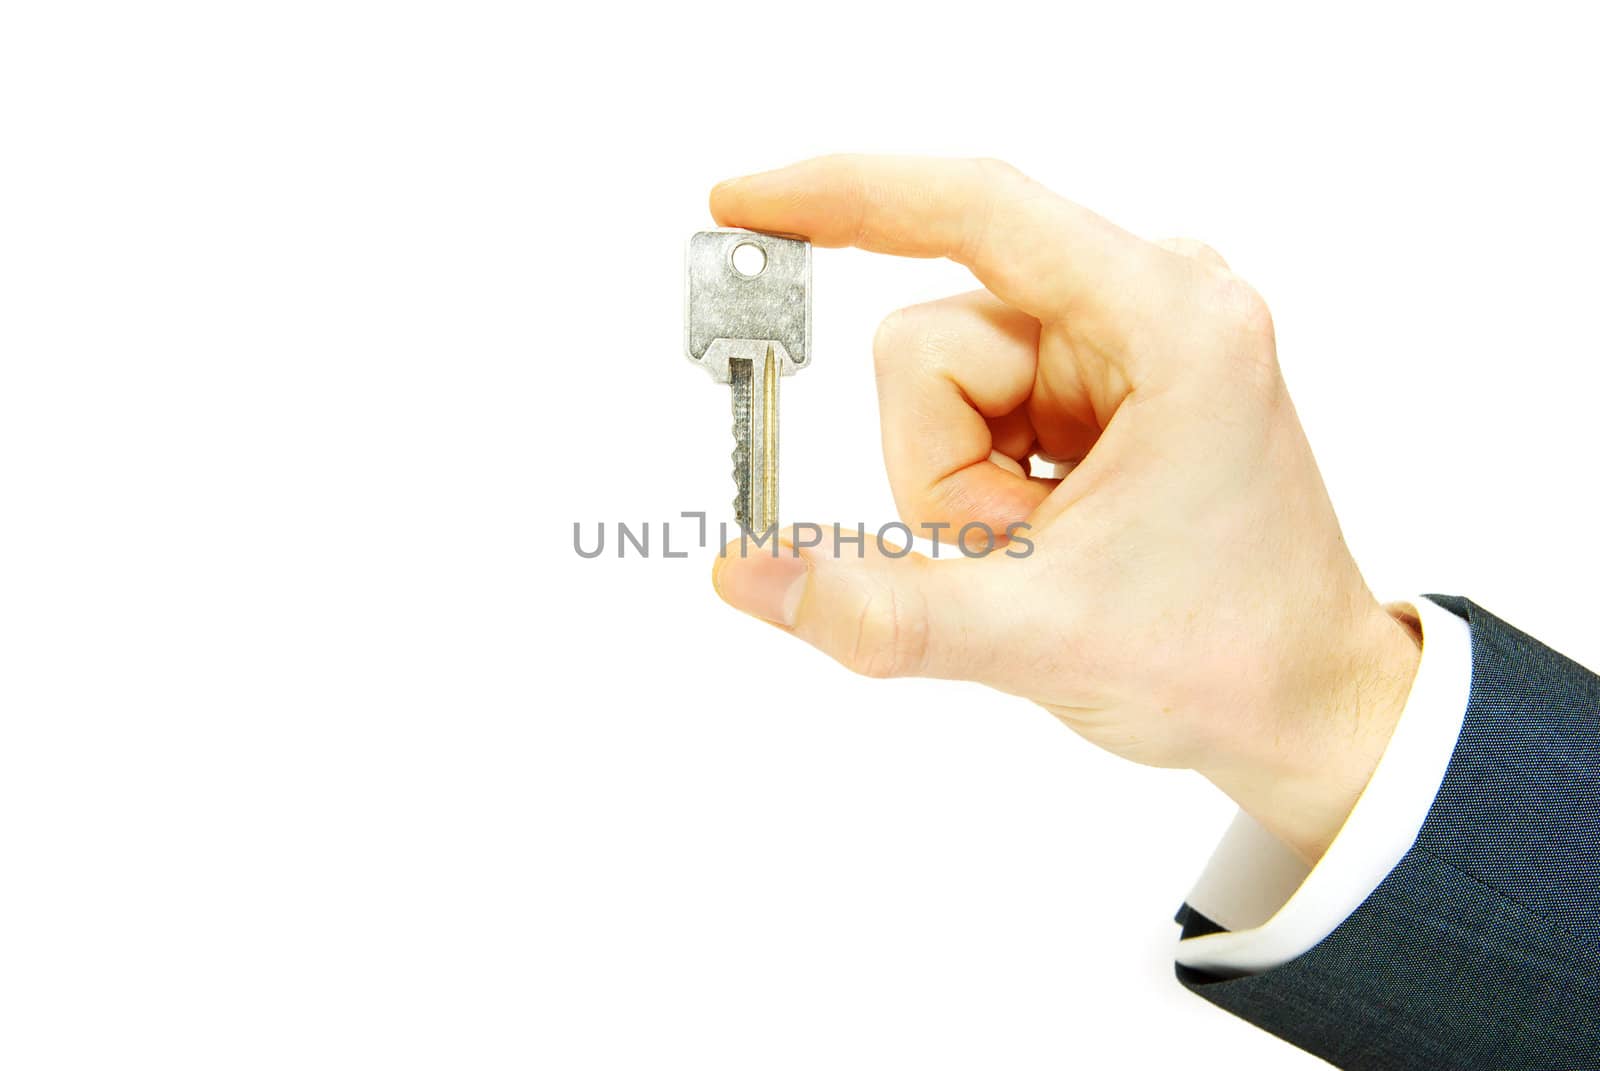 hand holds a key isolated on white